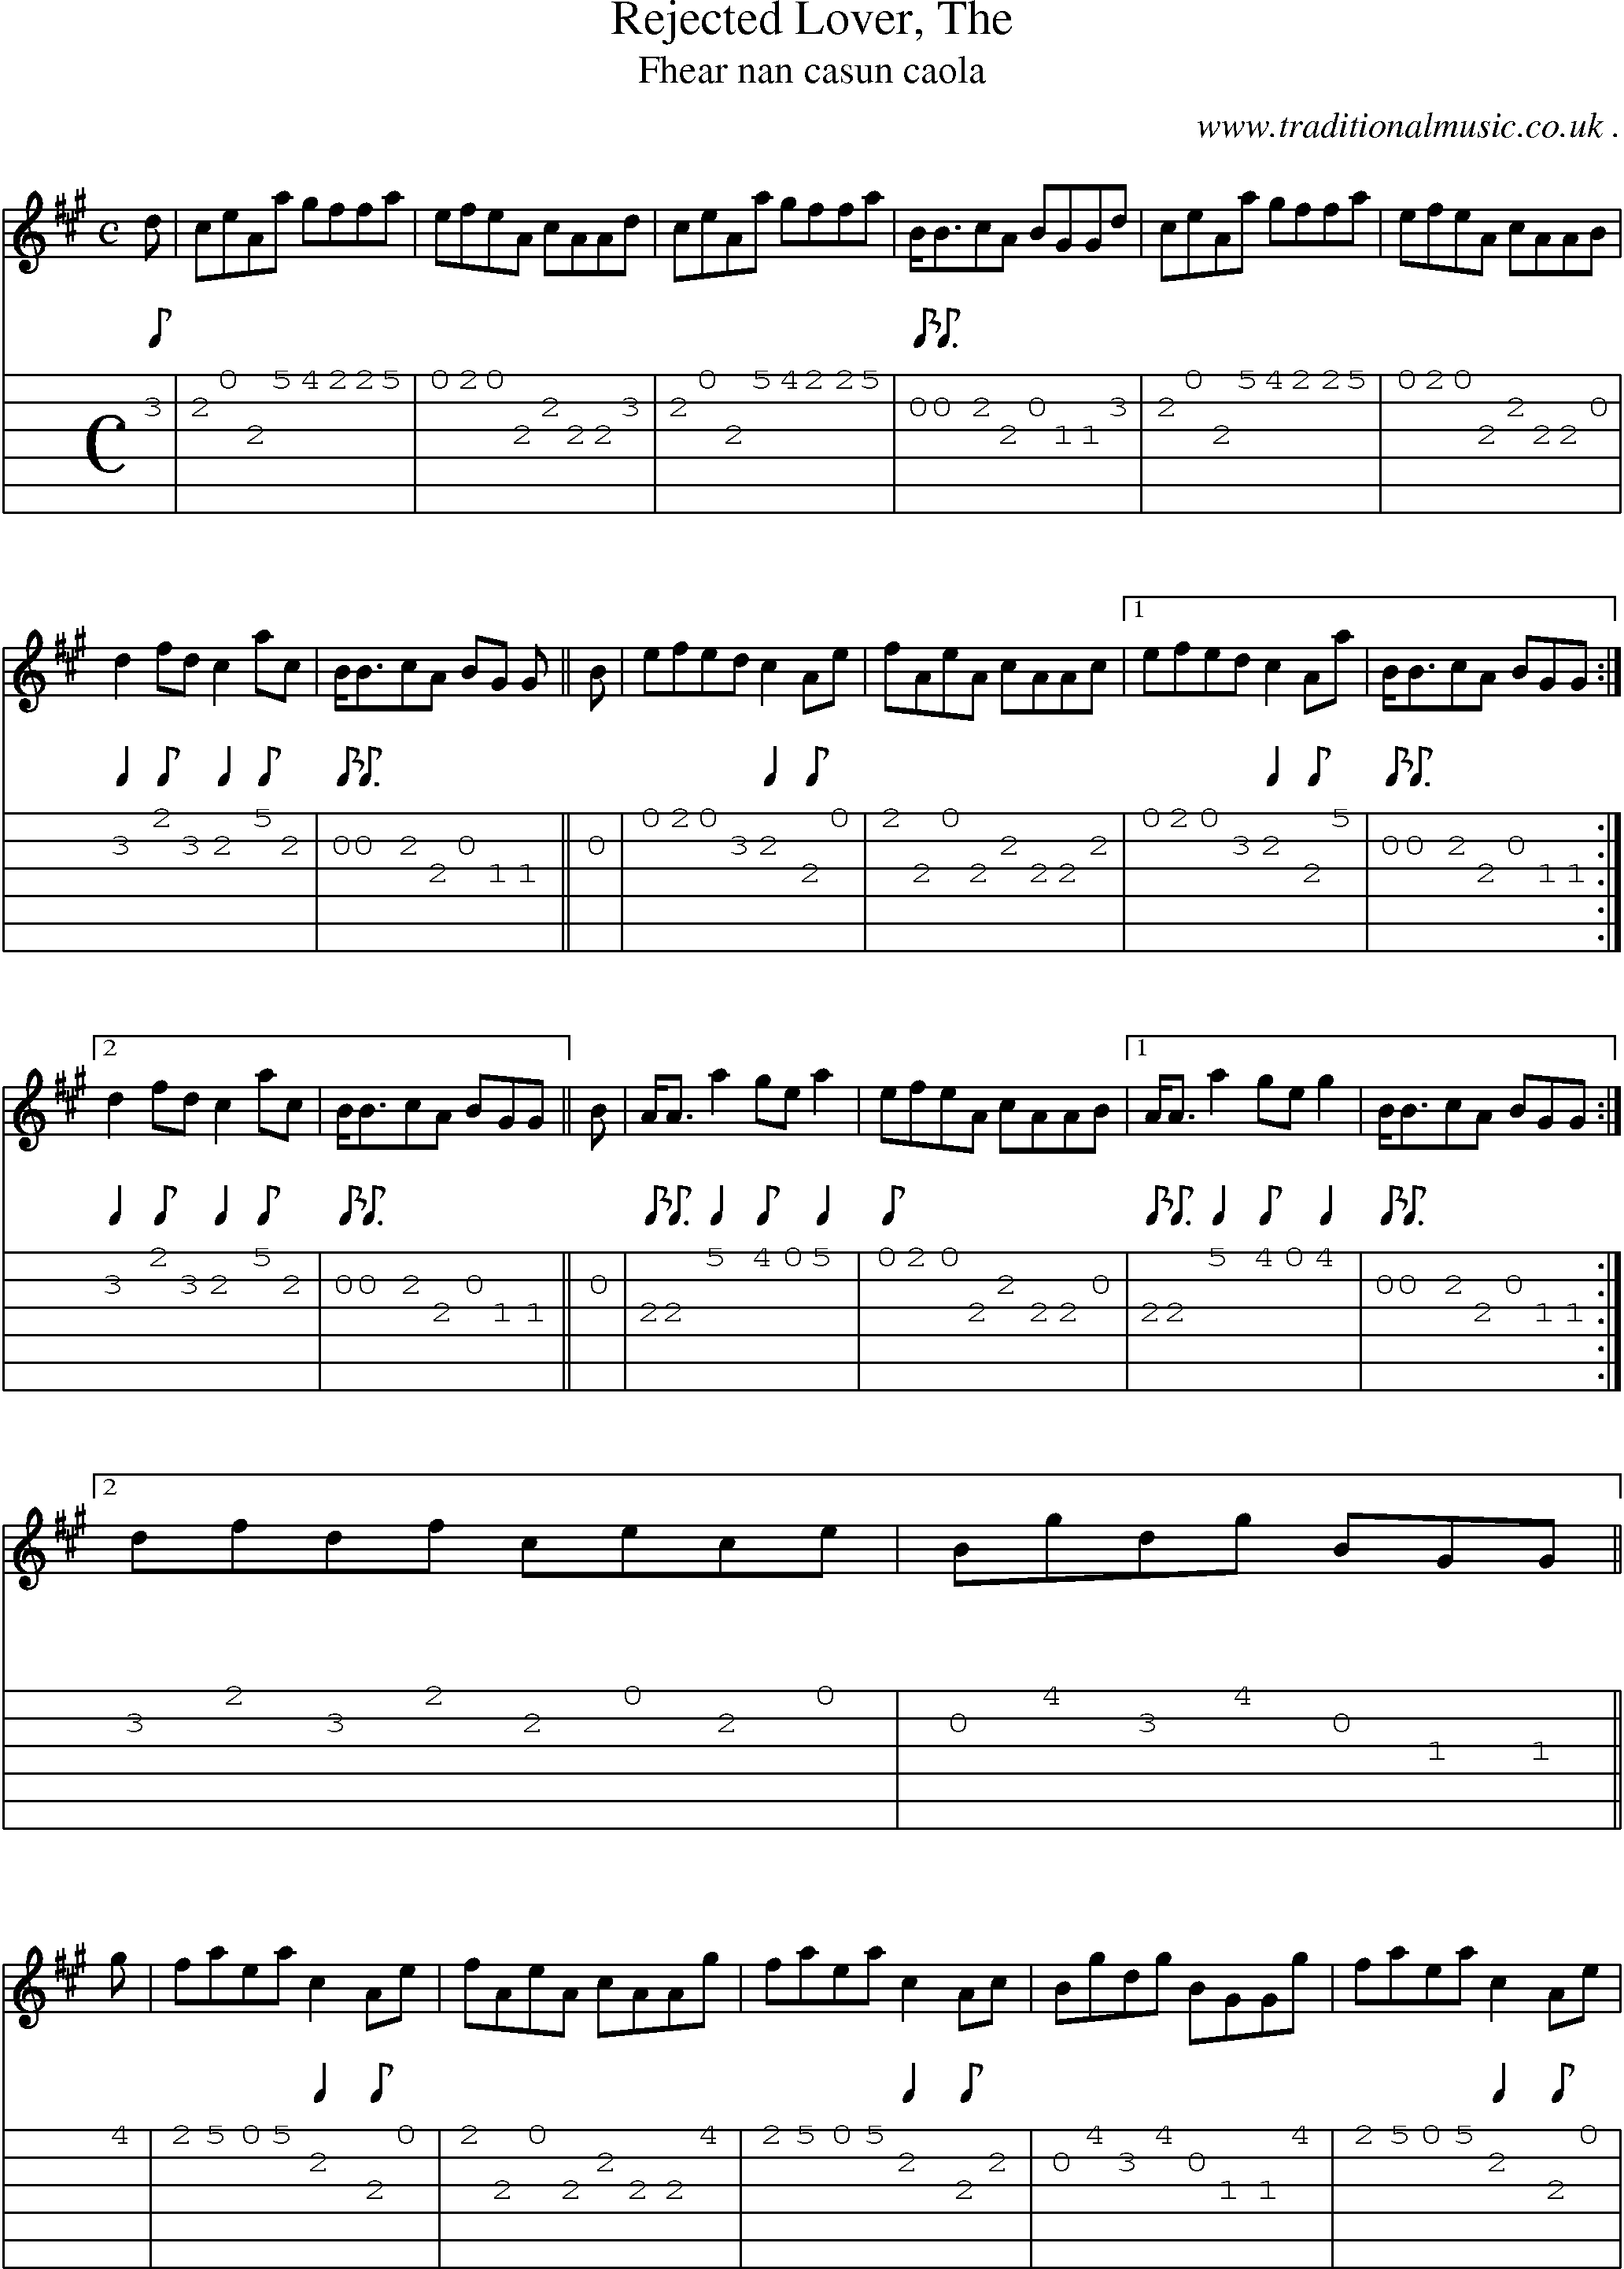 Sheet-music  score, Chords and Guitar Tabs for Rejected Lover The